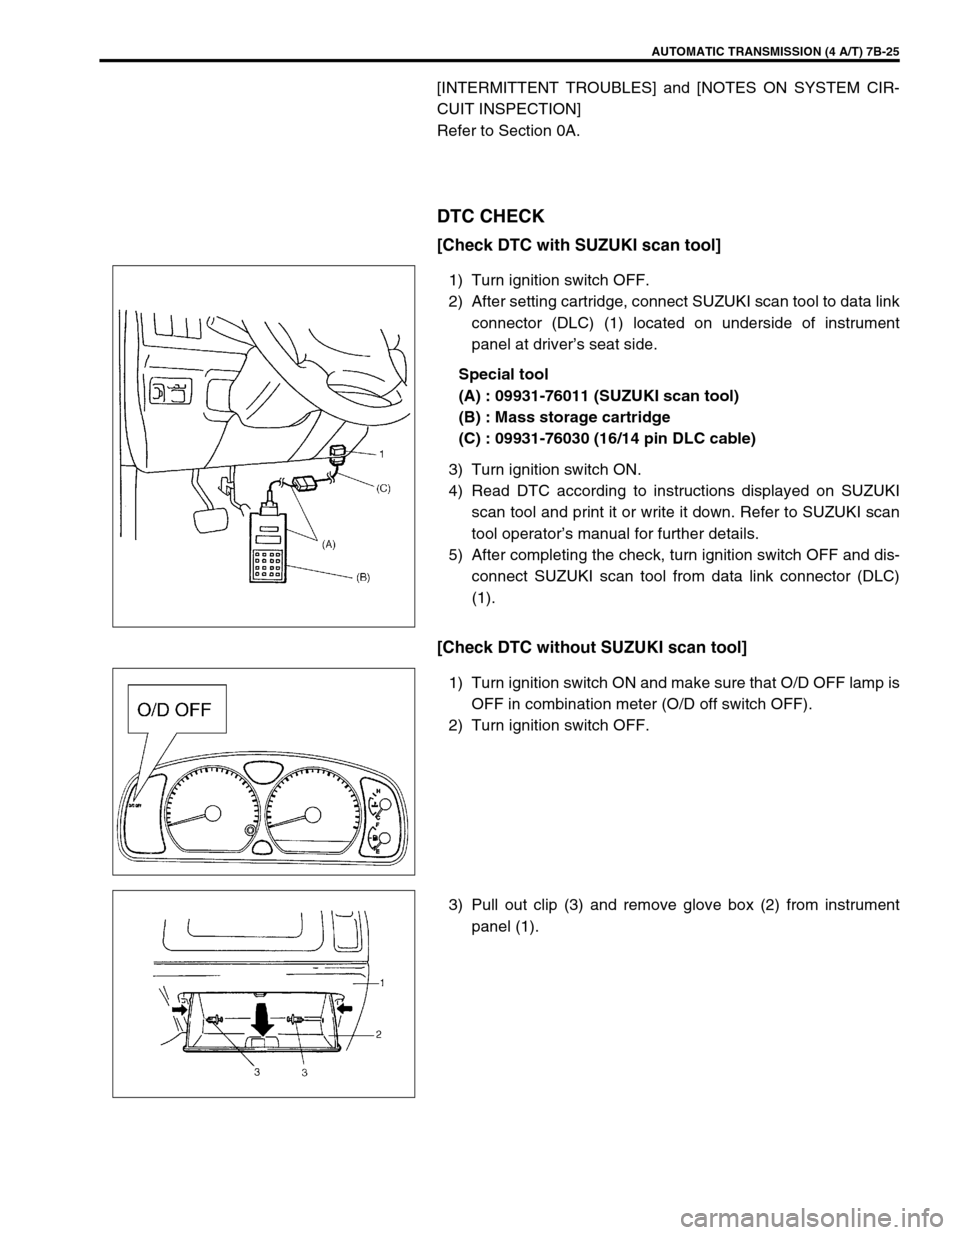 SUZUKI SWIFT 2000 1.G Transmission Service Workshop Manual AUTOMATIC TRANSMISSION (4 A/T) 7B-25
[INTERMITTENT TROUBLES] and [NOTES ON SYSTEM CIR-
CUIT INSPECTION]
Refer to Section 0A.
DTC CHECK
[Check DTC with SUZUKI scan tool]
1) Turn ignition switch OFF.
2)